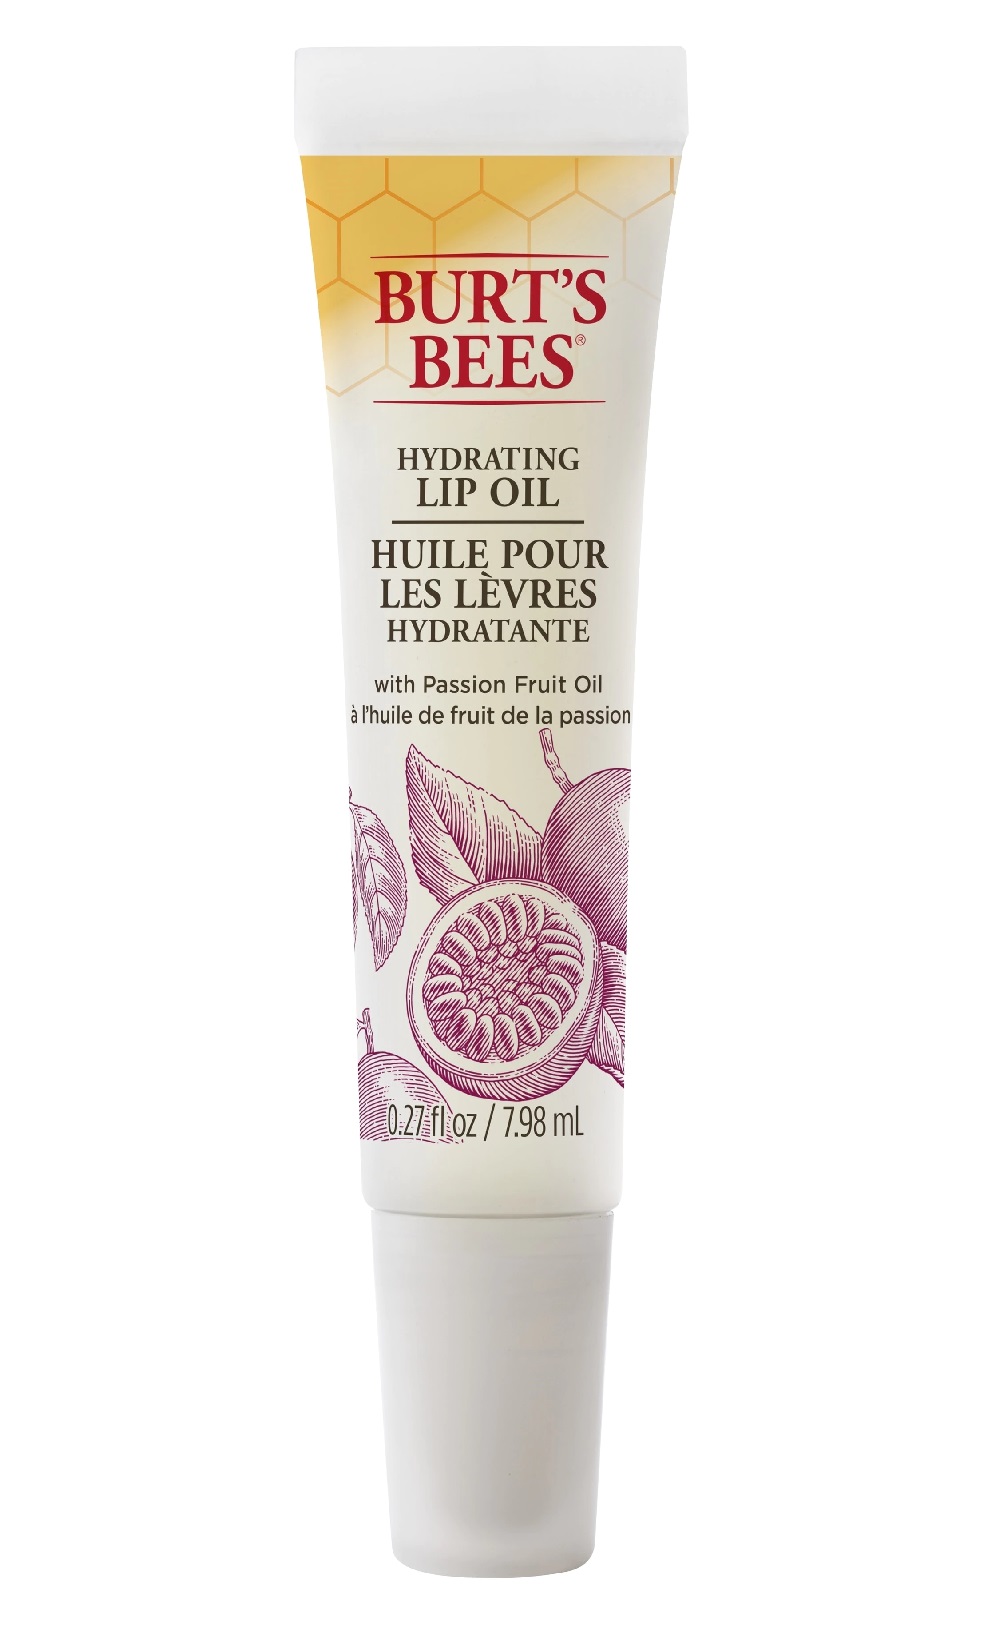 burts bees hydrating lip oil with passion fruit oil